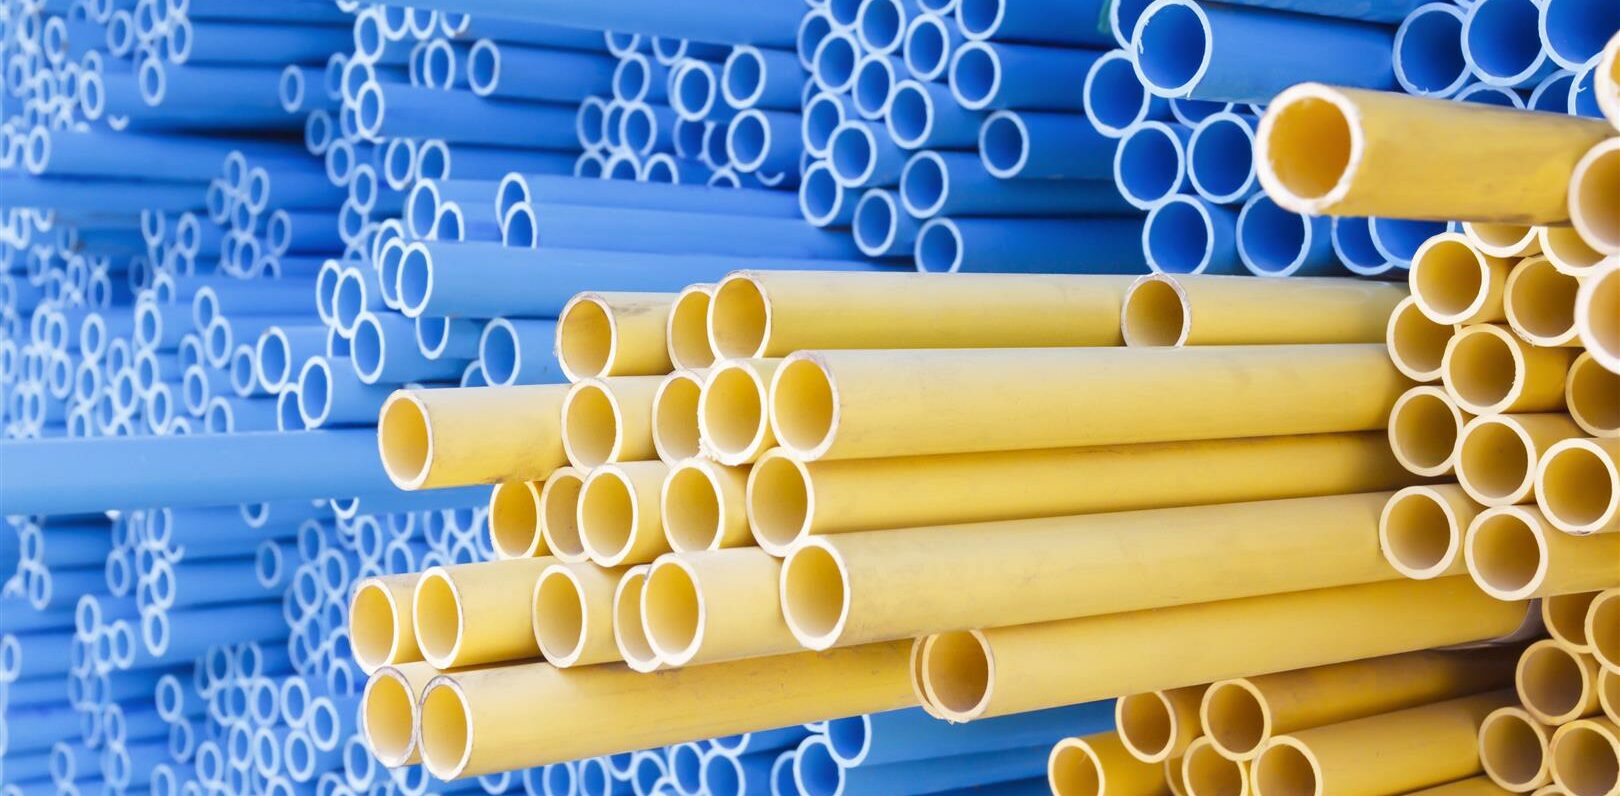 PVC pipes for electric conduit (yellow) and water (blue)